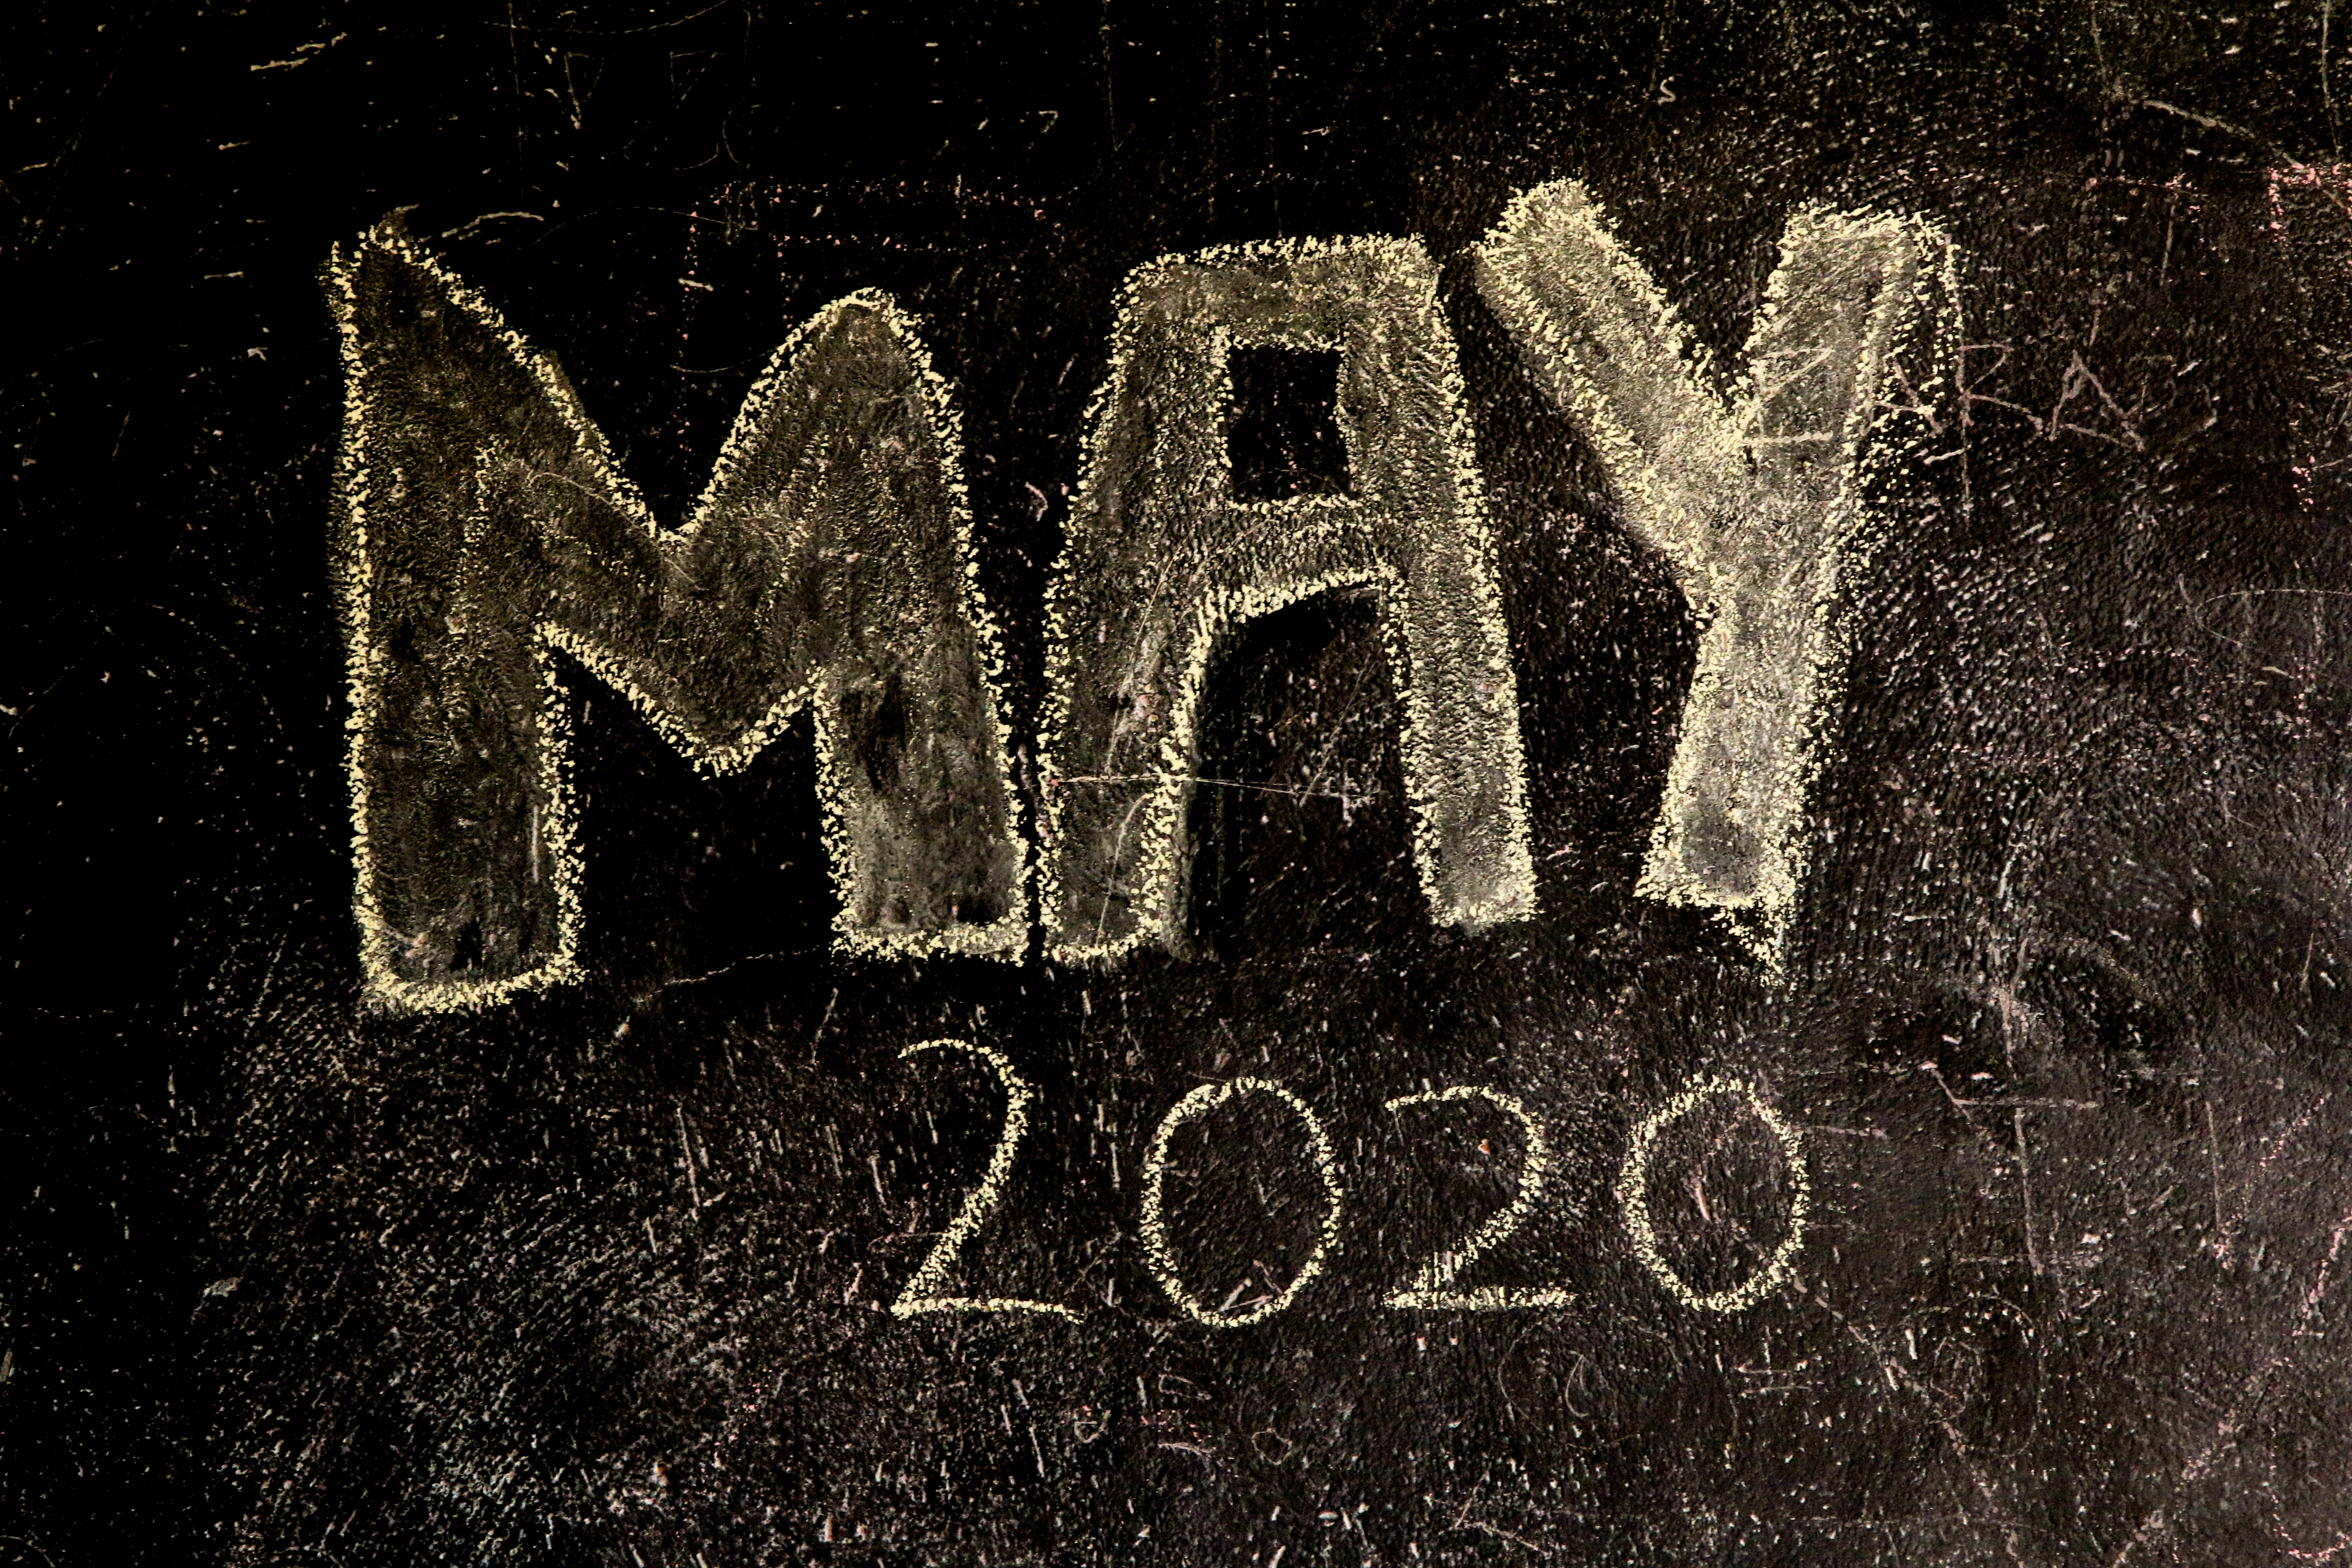 The world of work in May 2020, in two words. Proactive coping.